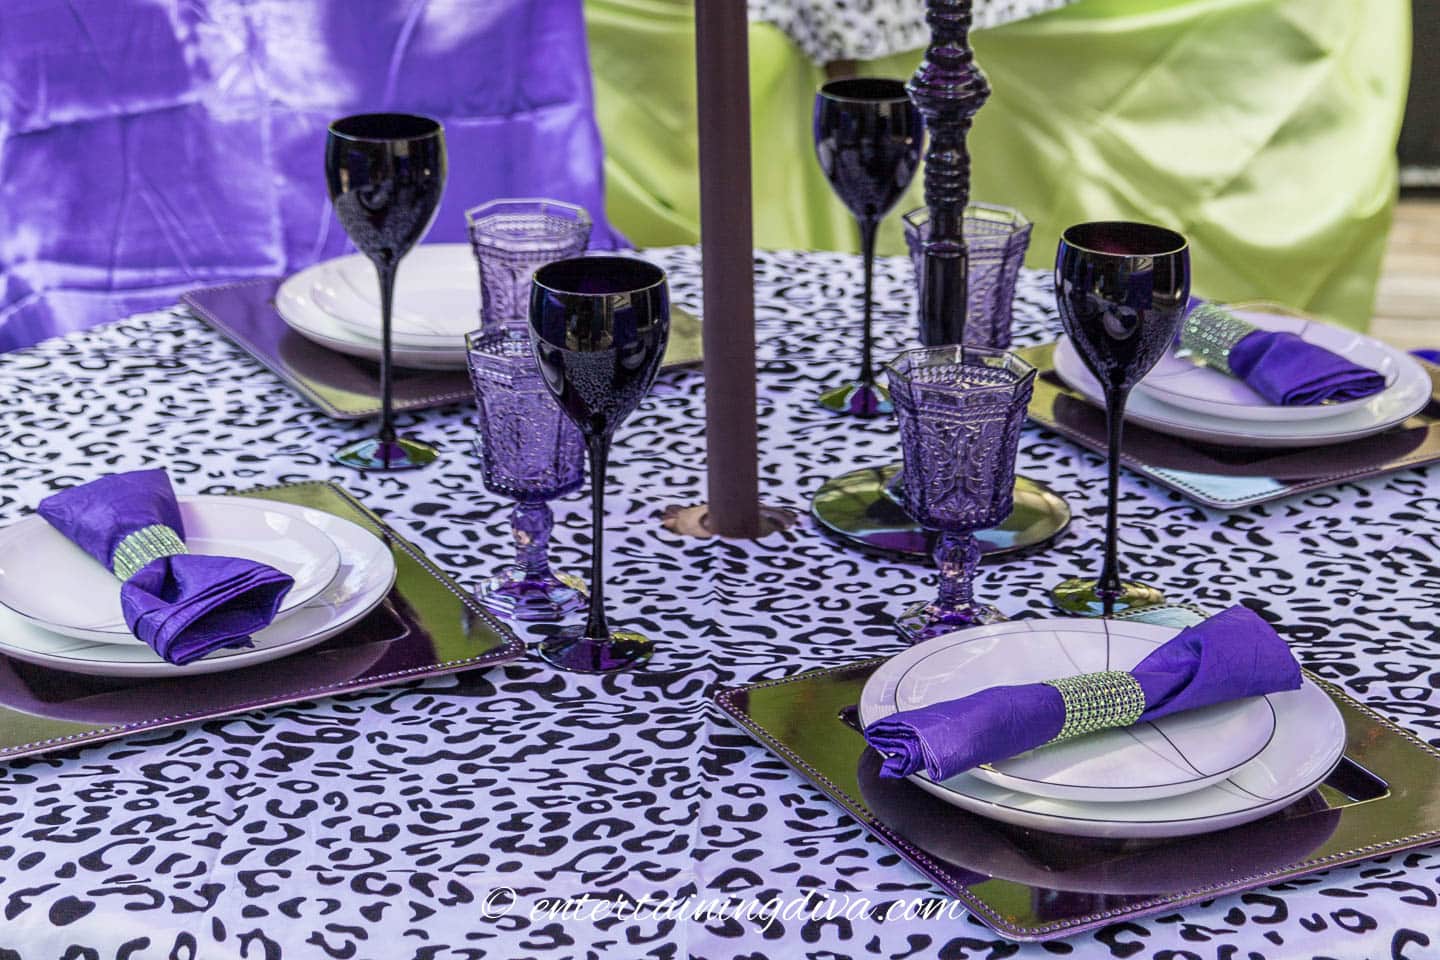 Black and white table setting with a black and white leopard print tablecloth